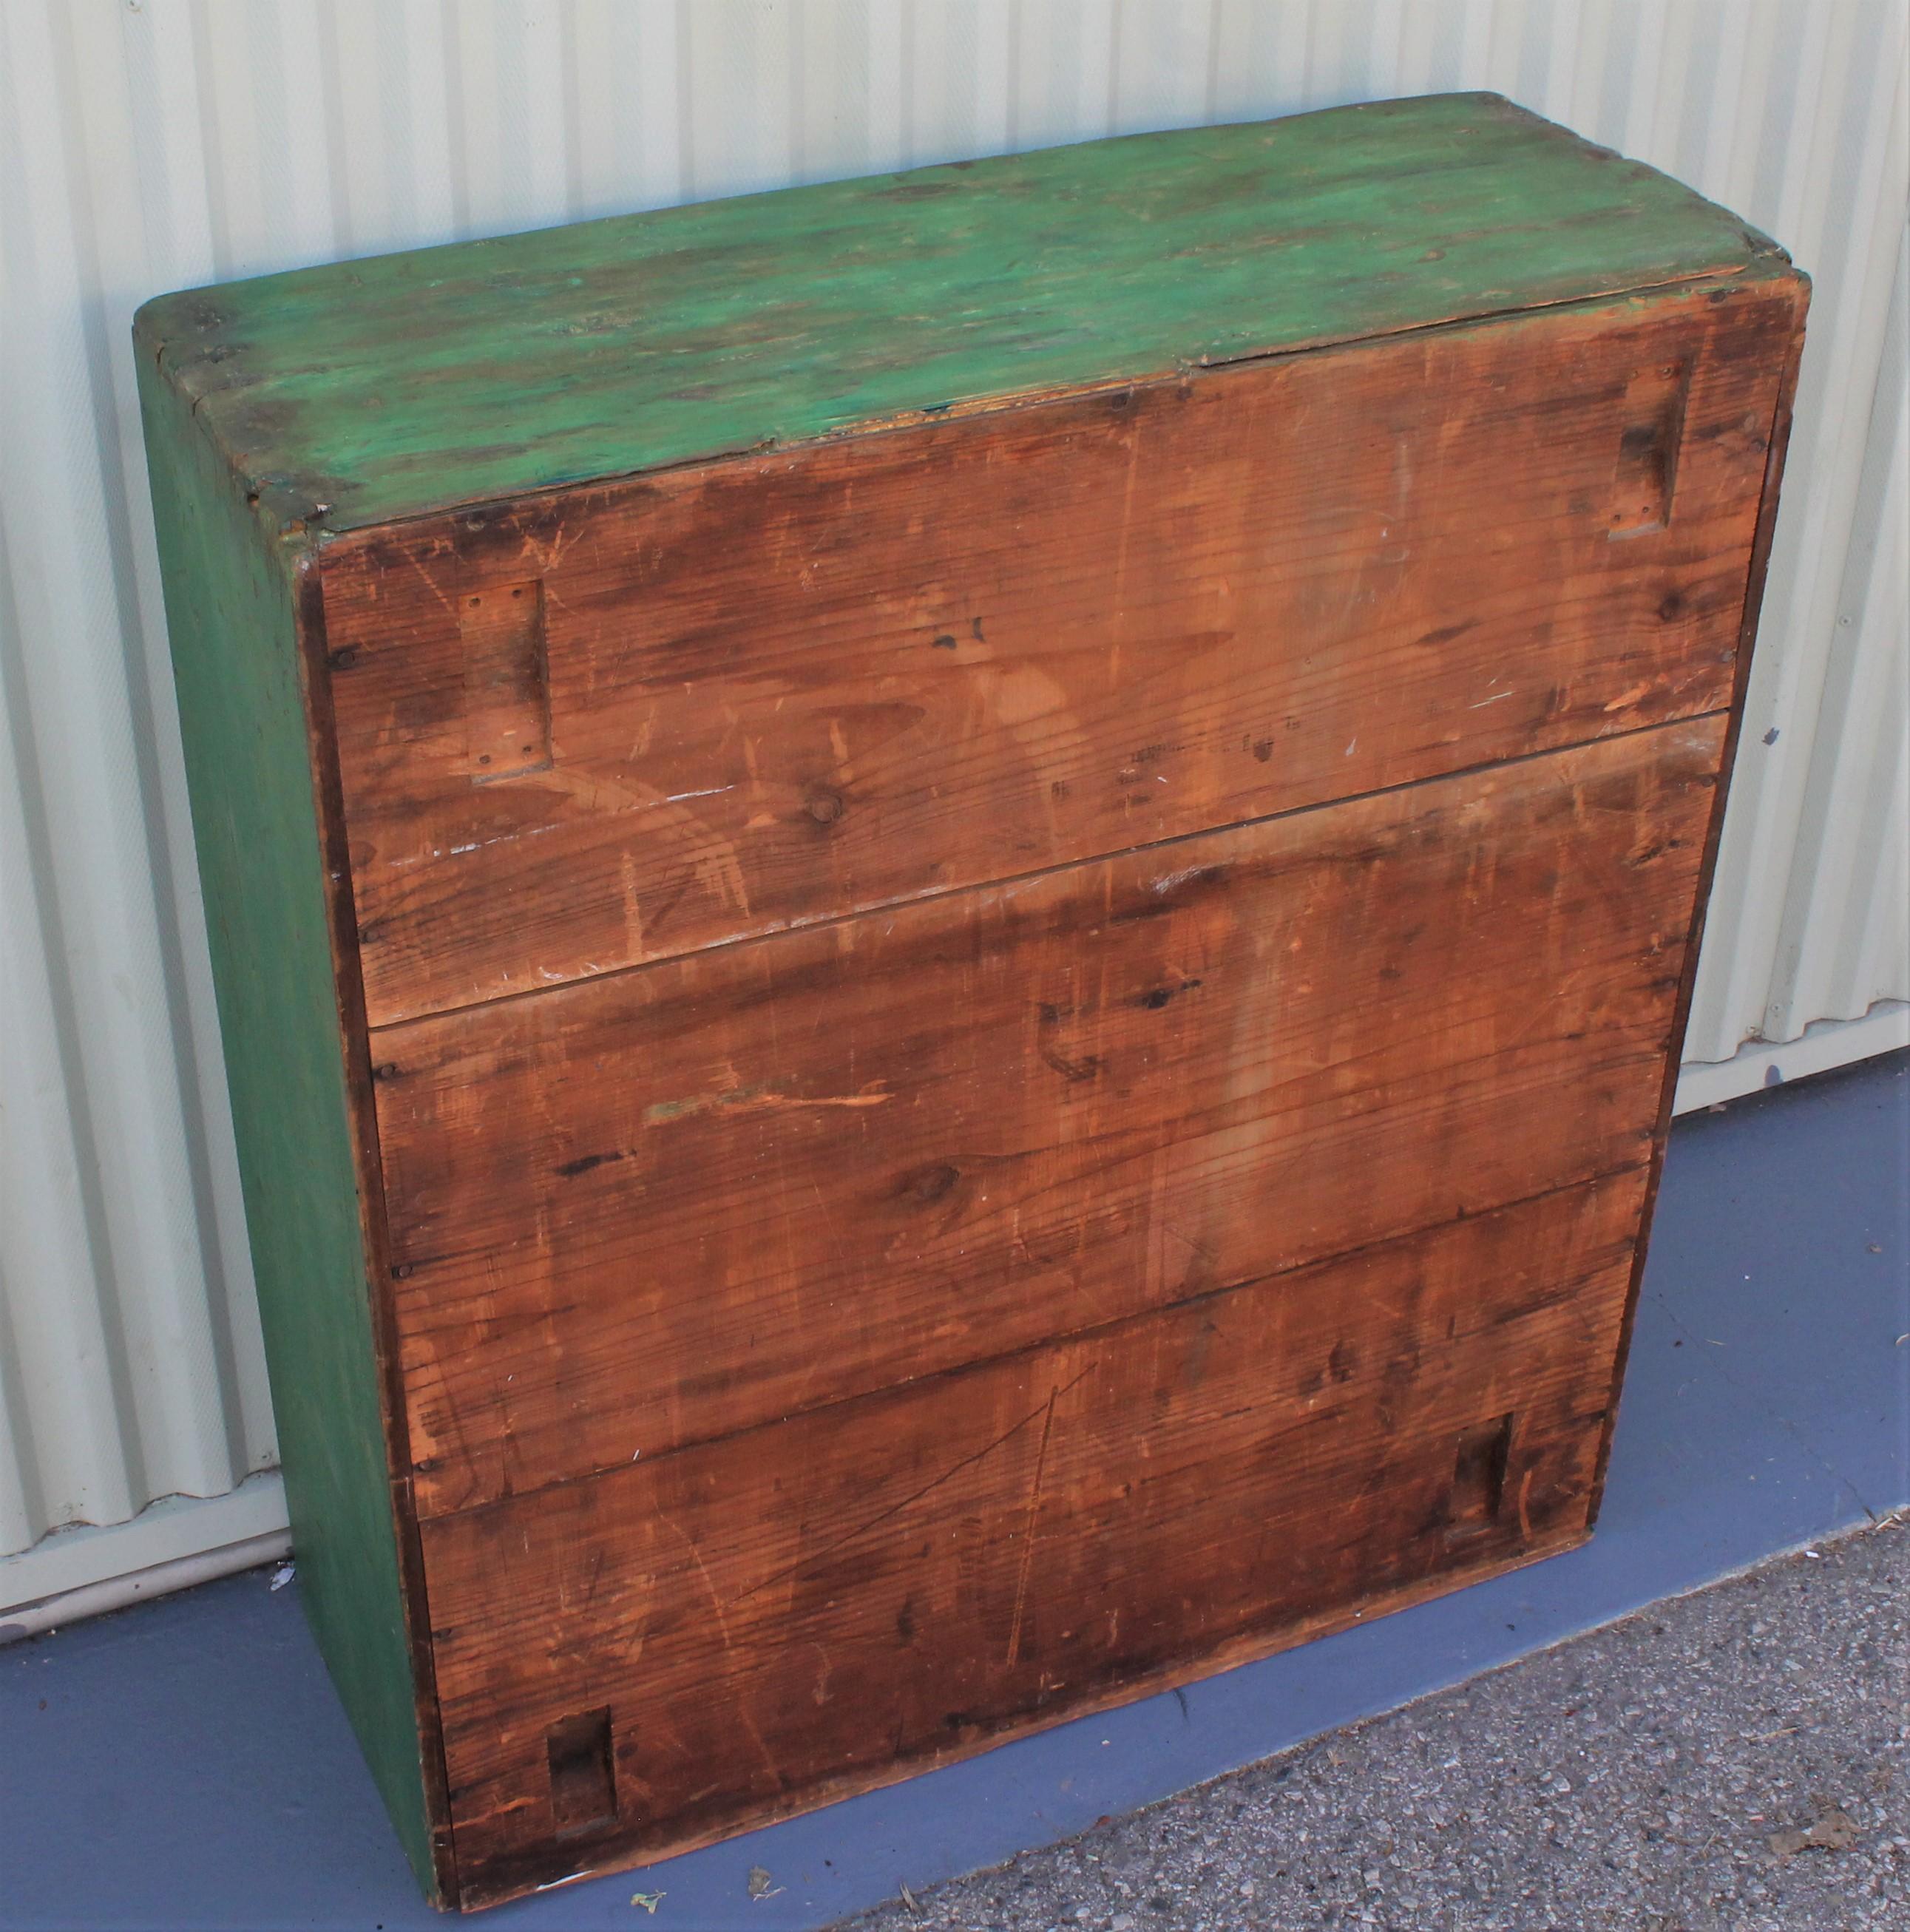 Hand-Crafted 19th Century Original Green Painted Two-Door Cabinet from Pennsylvania